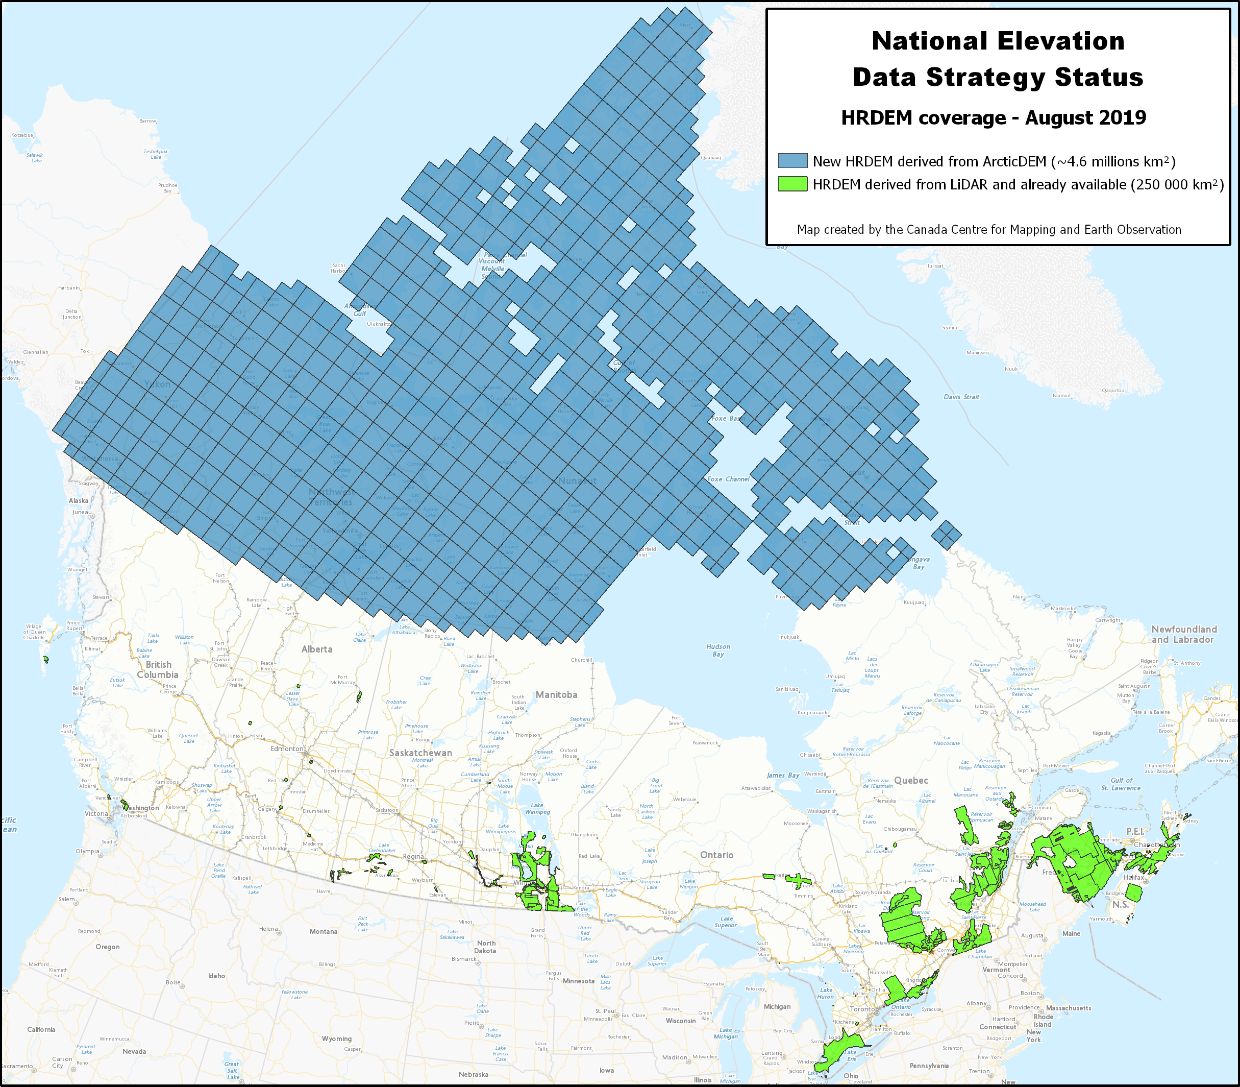 HRDEM coverage map as of August 2019